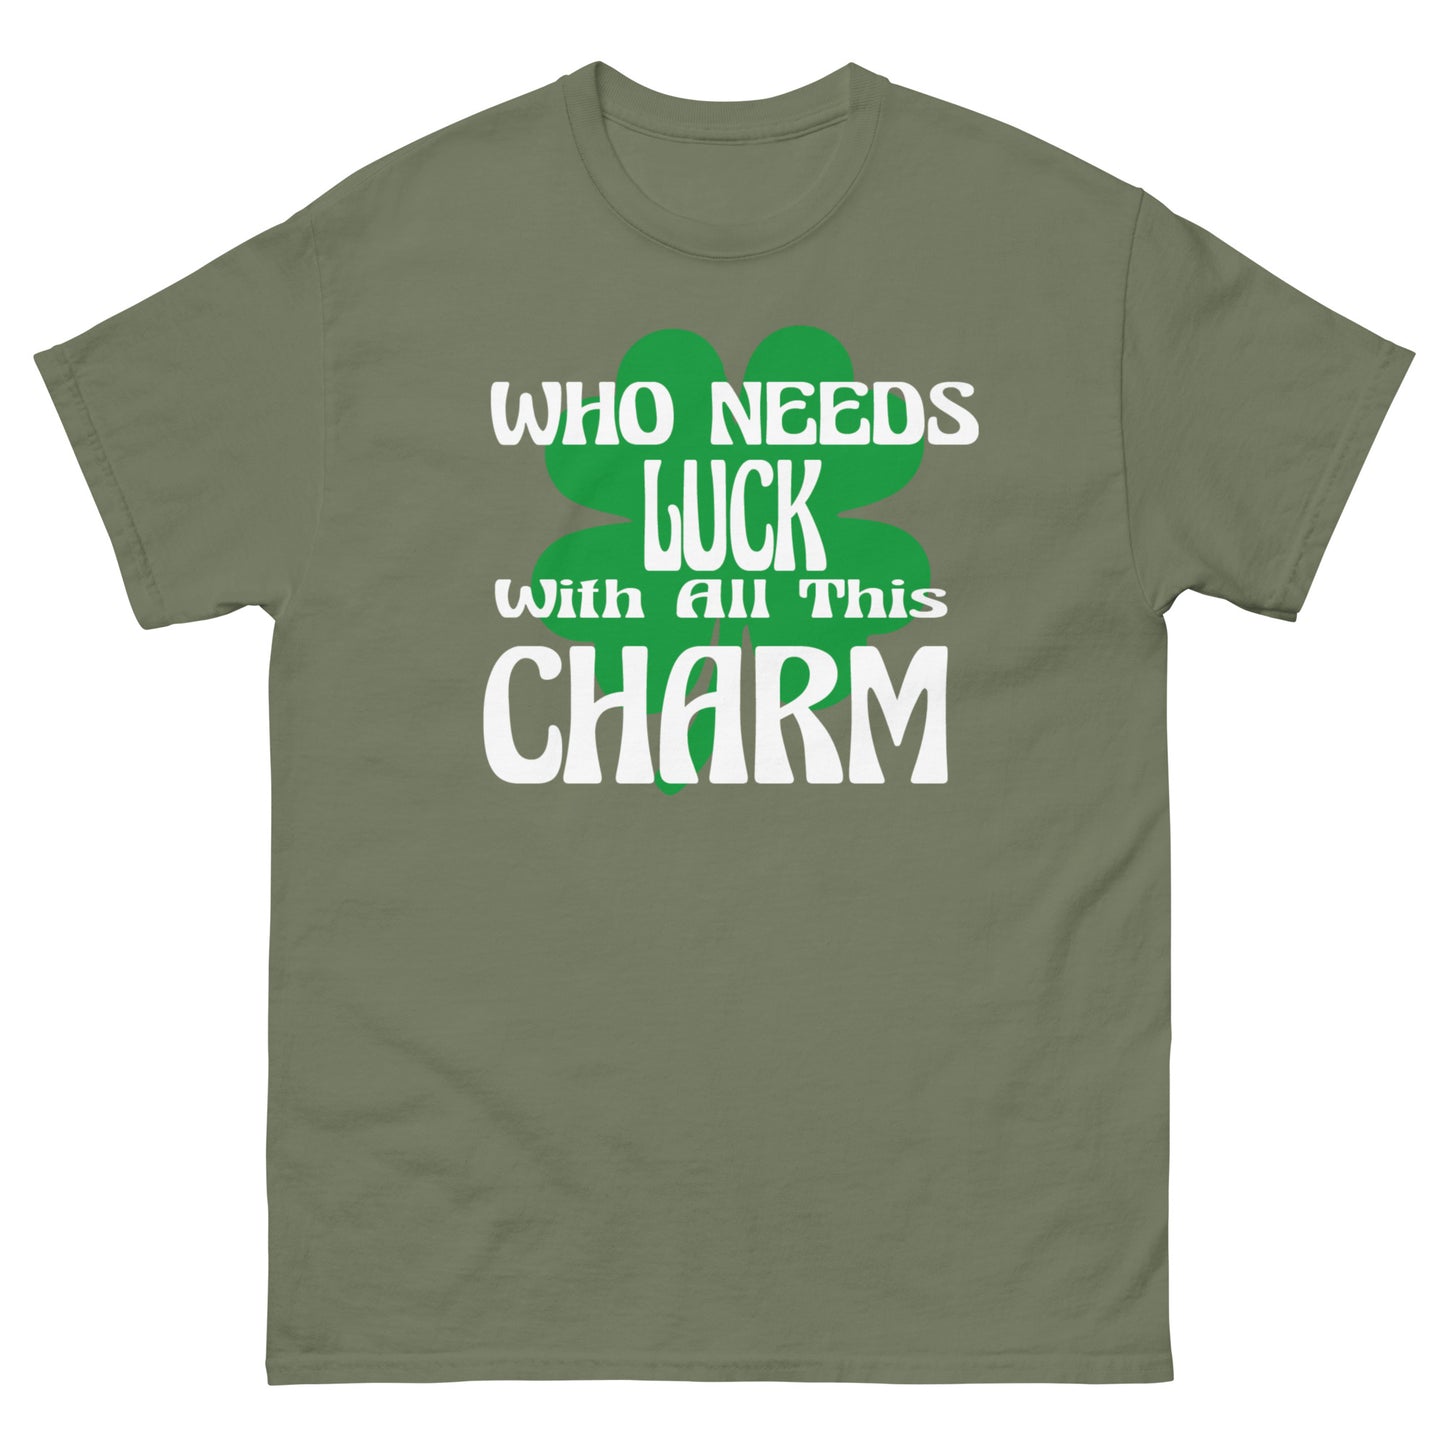 With all this luck who needs charm-St. Patrick's Day T-Shirt